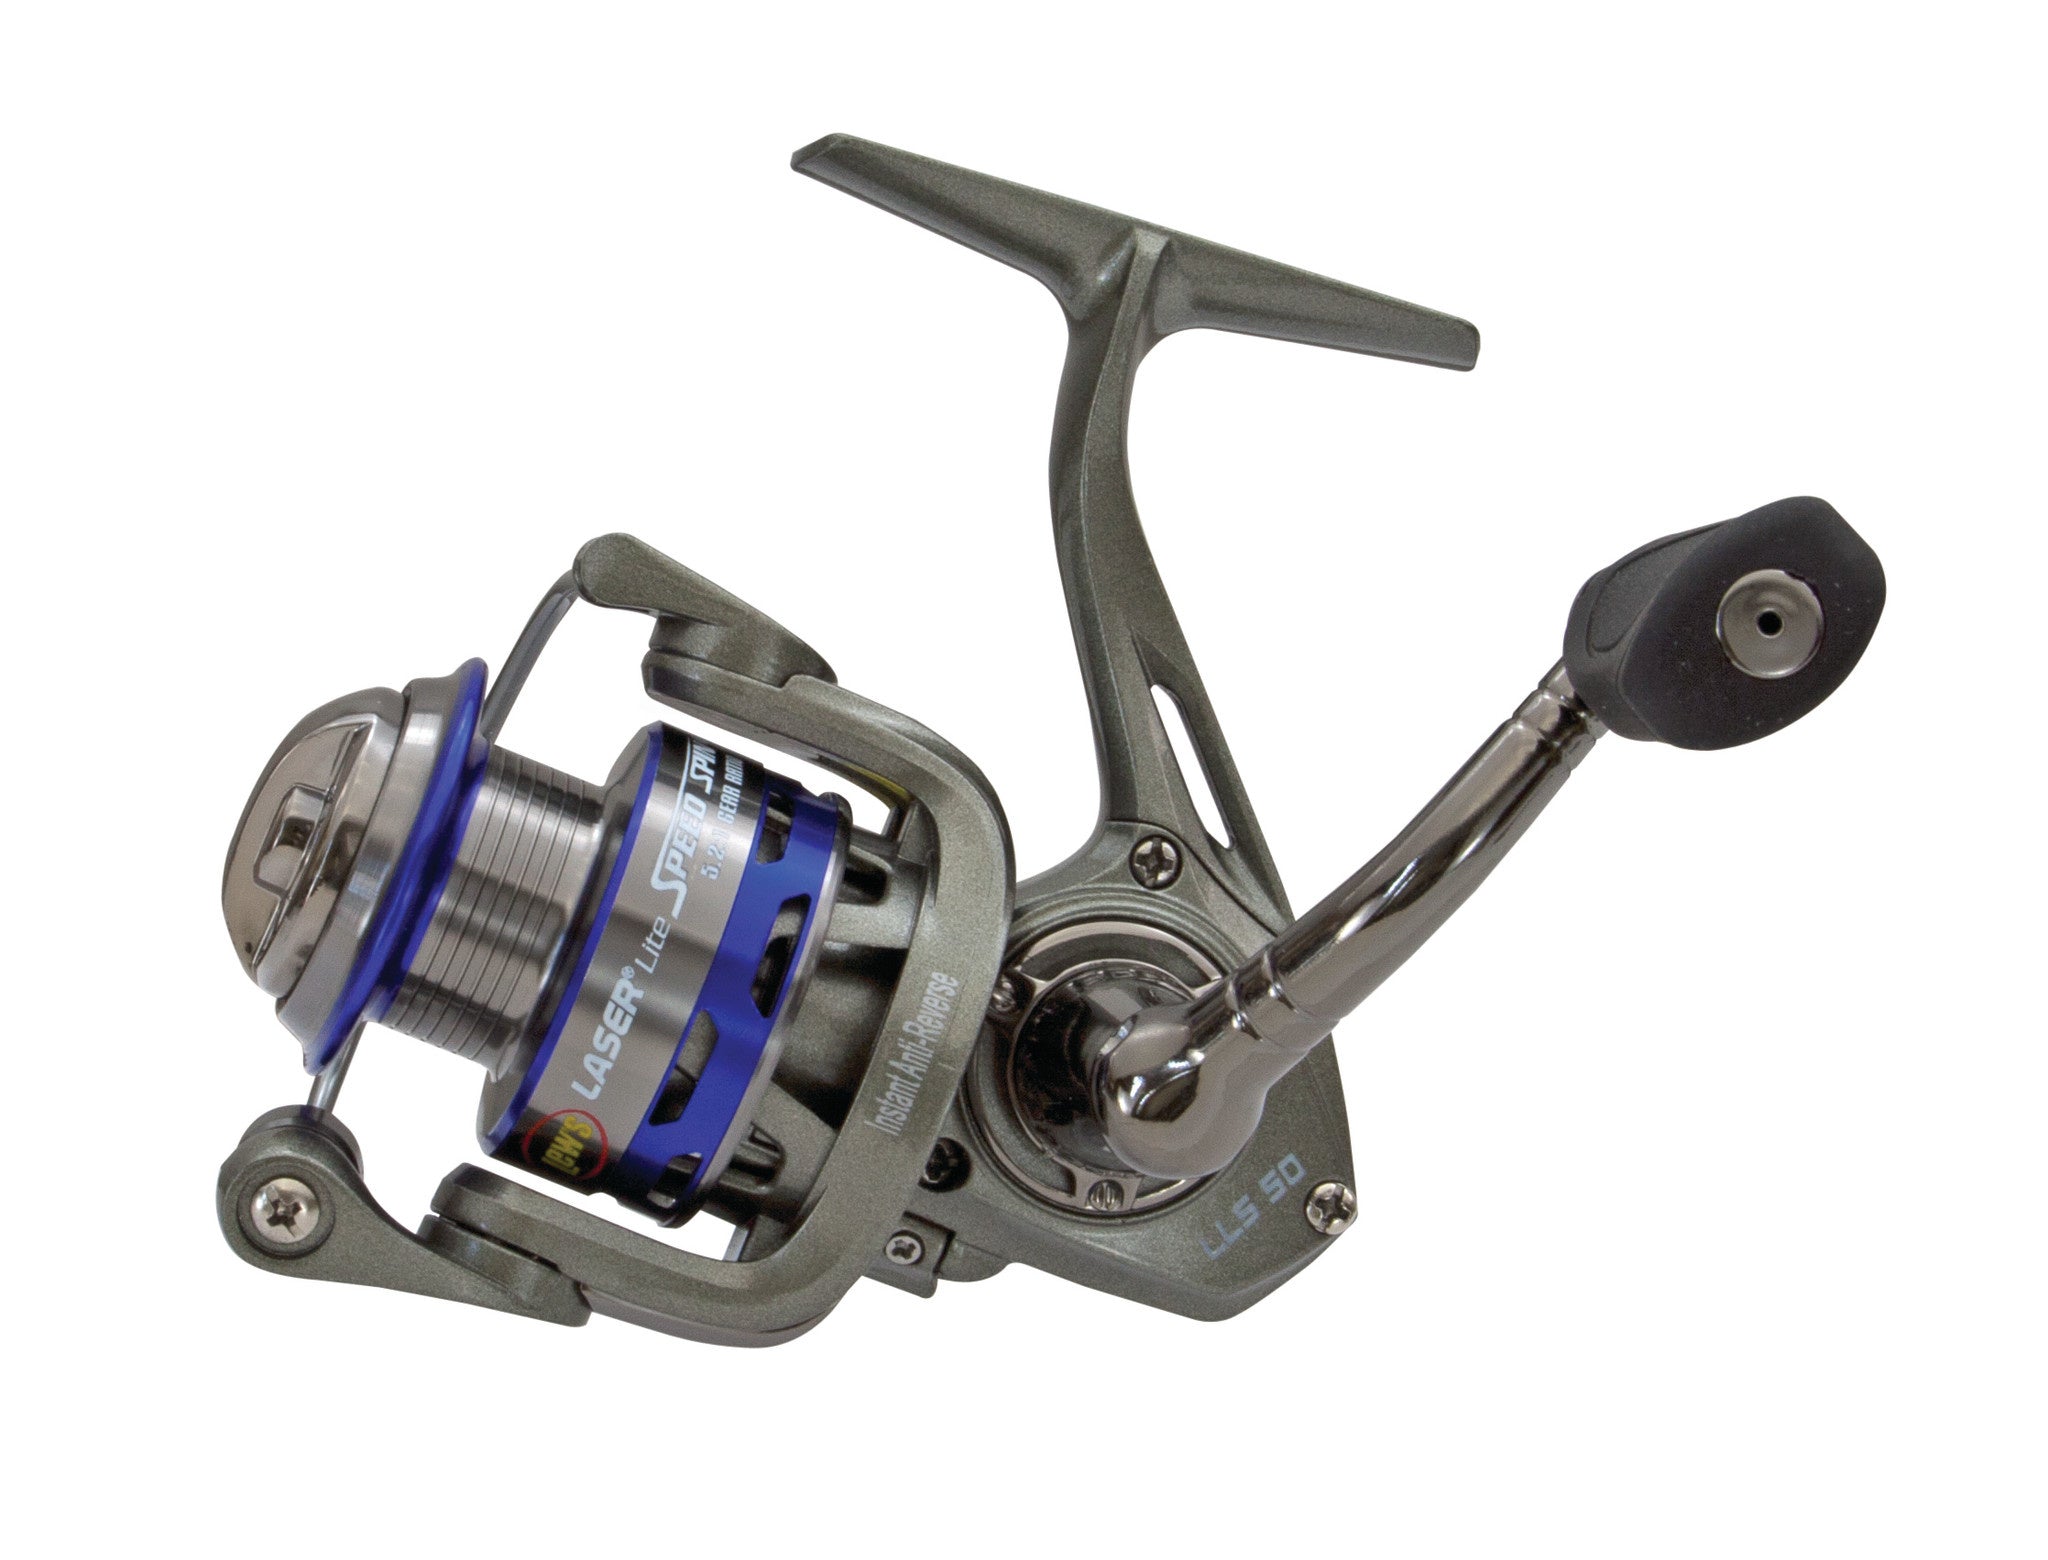 Lew's Mach II Metal Spin 200 6.2:1 Spin Reel